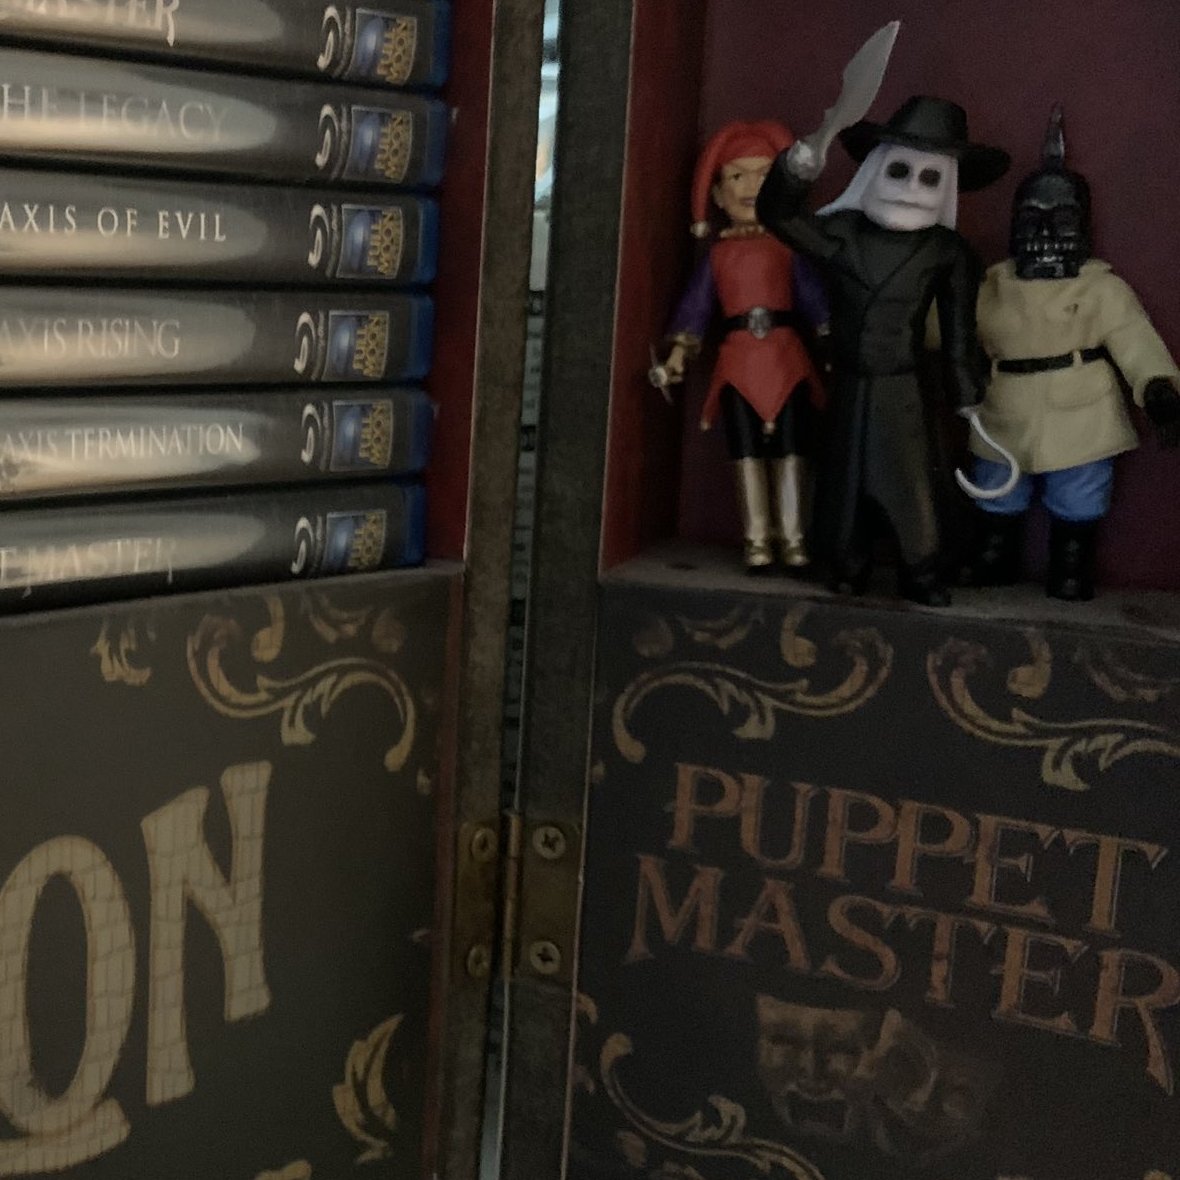 Not quite a playset, but when PUPPET MASTER was my #1 childhood toy obsession, there was going to be a Puppet Trunk carrying case, but it was canceled. I'm so glad that the size of the new figures, alongside the Blu-ray set, can finally make that dream come true.